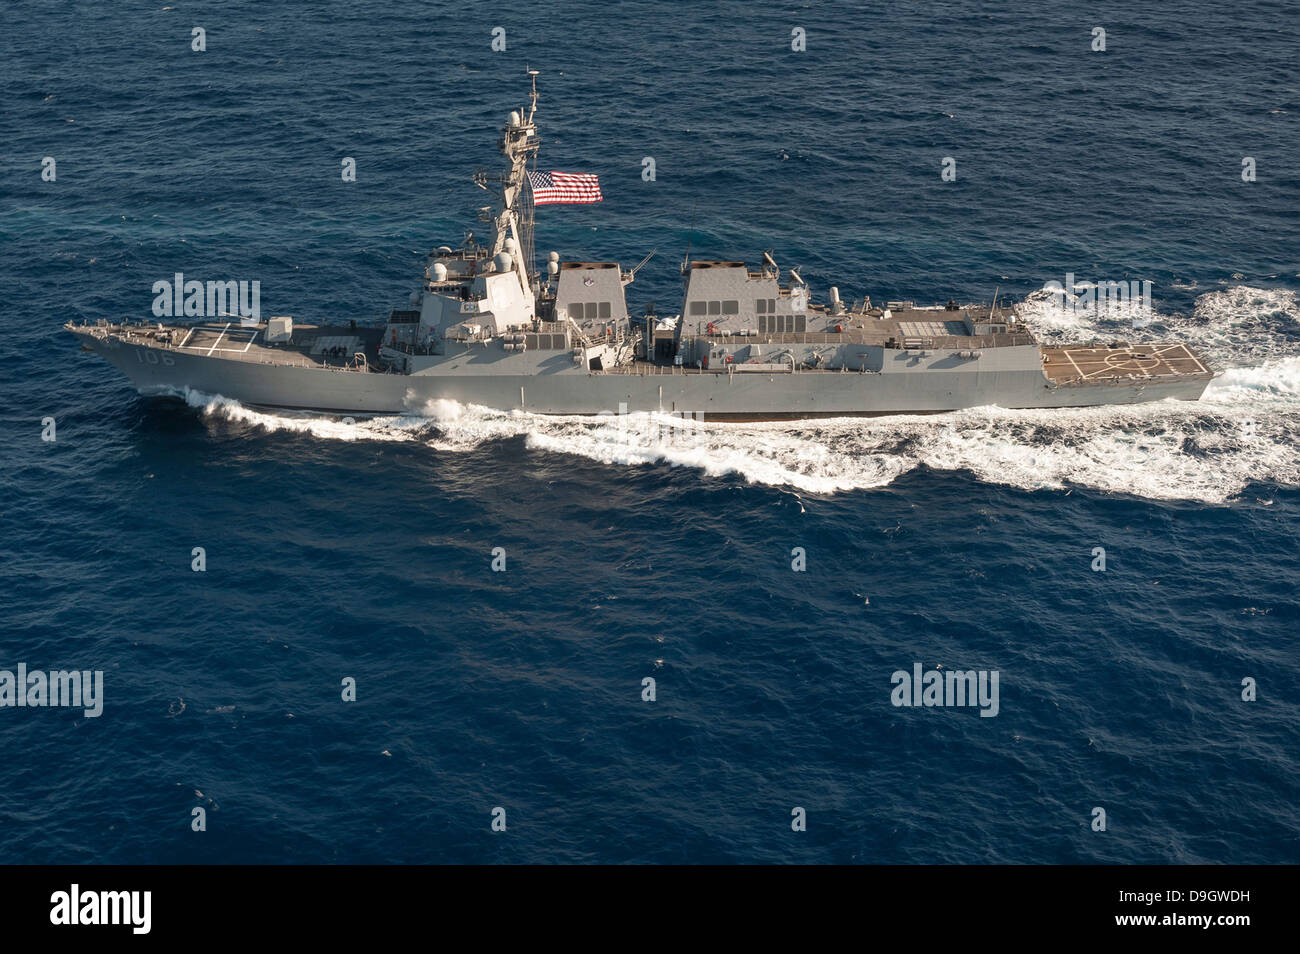 Il Arleigh Burke-class guidato-missile destroyer USS Stockdale. Foto Stock